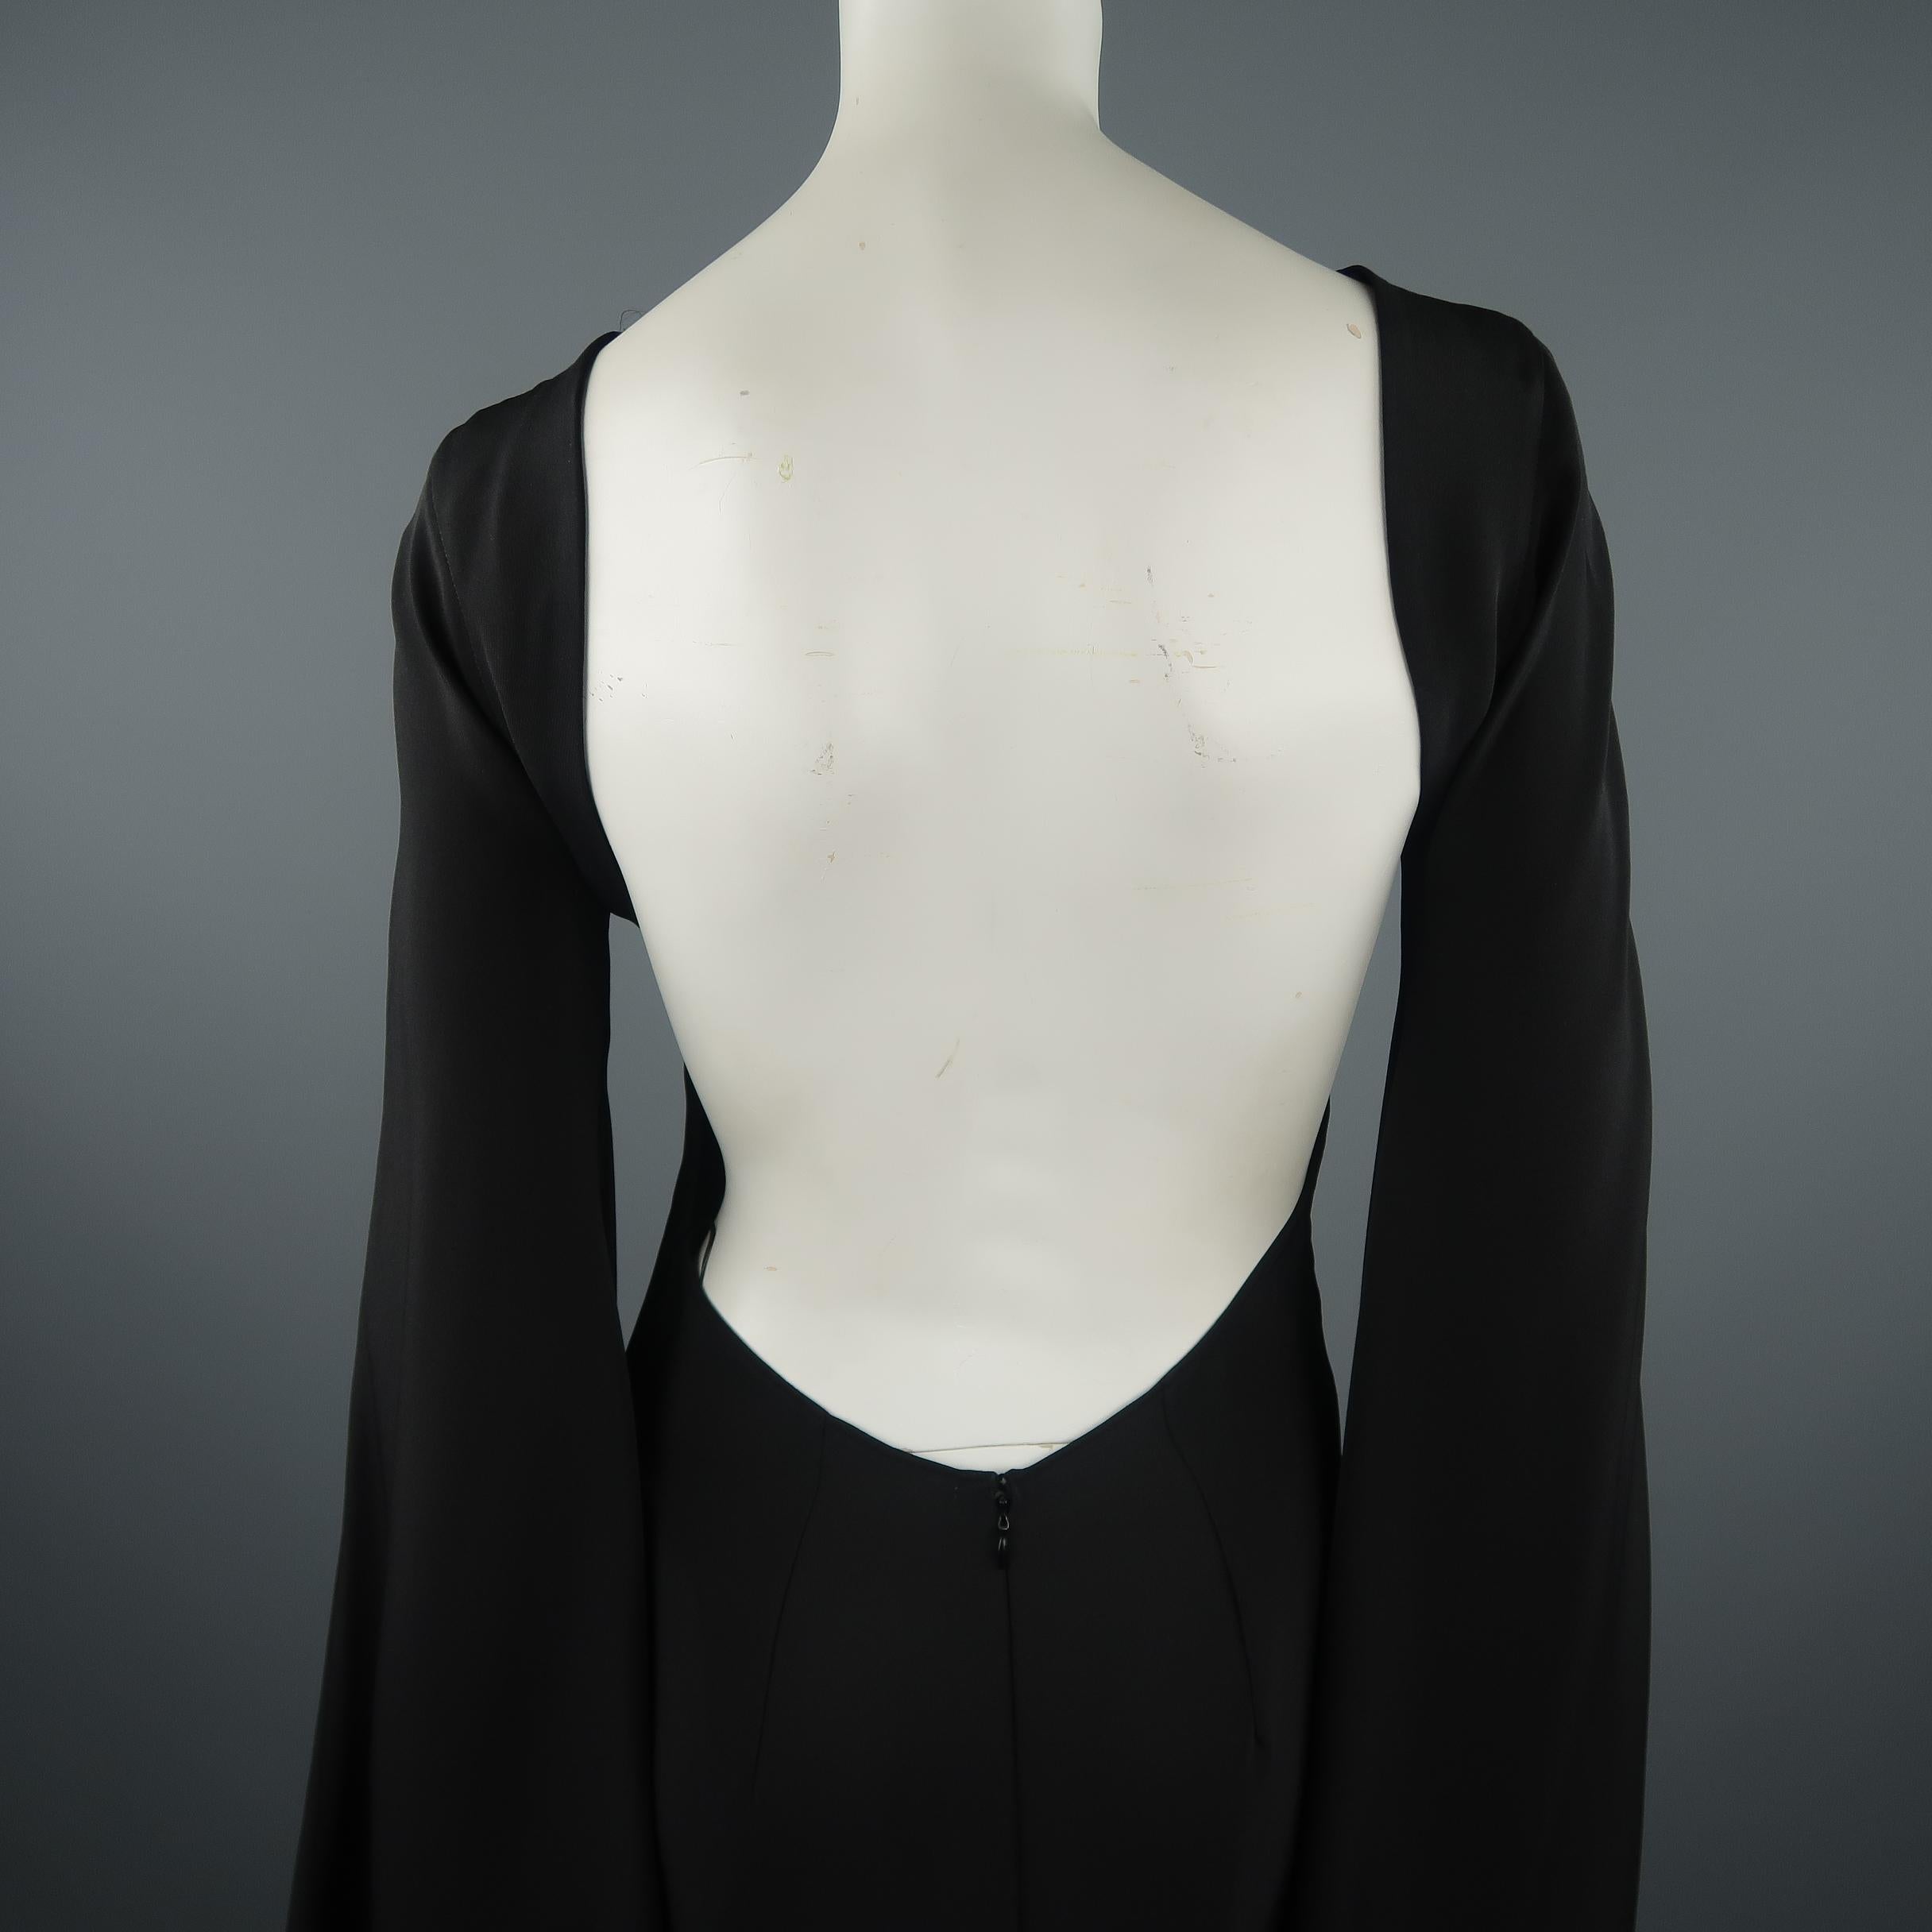 Iconic TOM FORD - Spring 2013 Runway Size 4 Black Silk Open Back Cocktail Dress 5